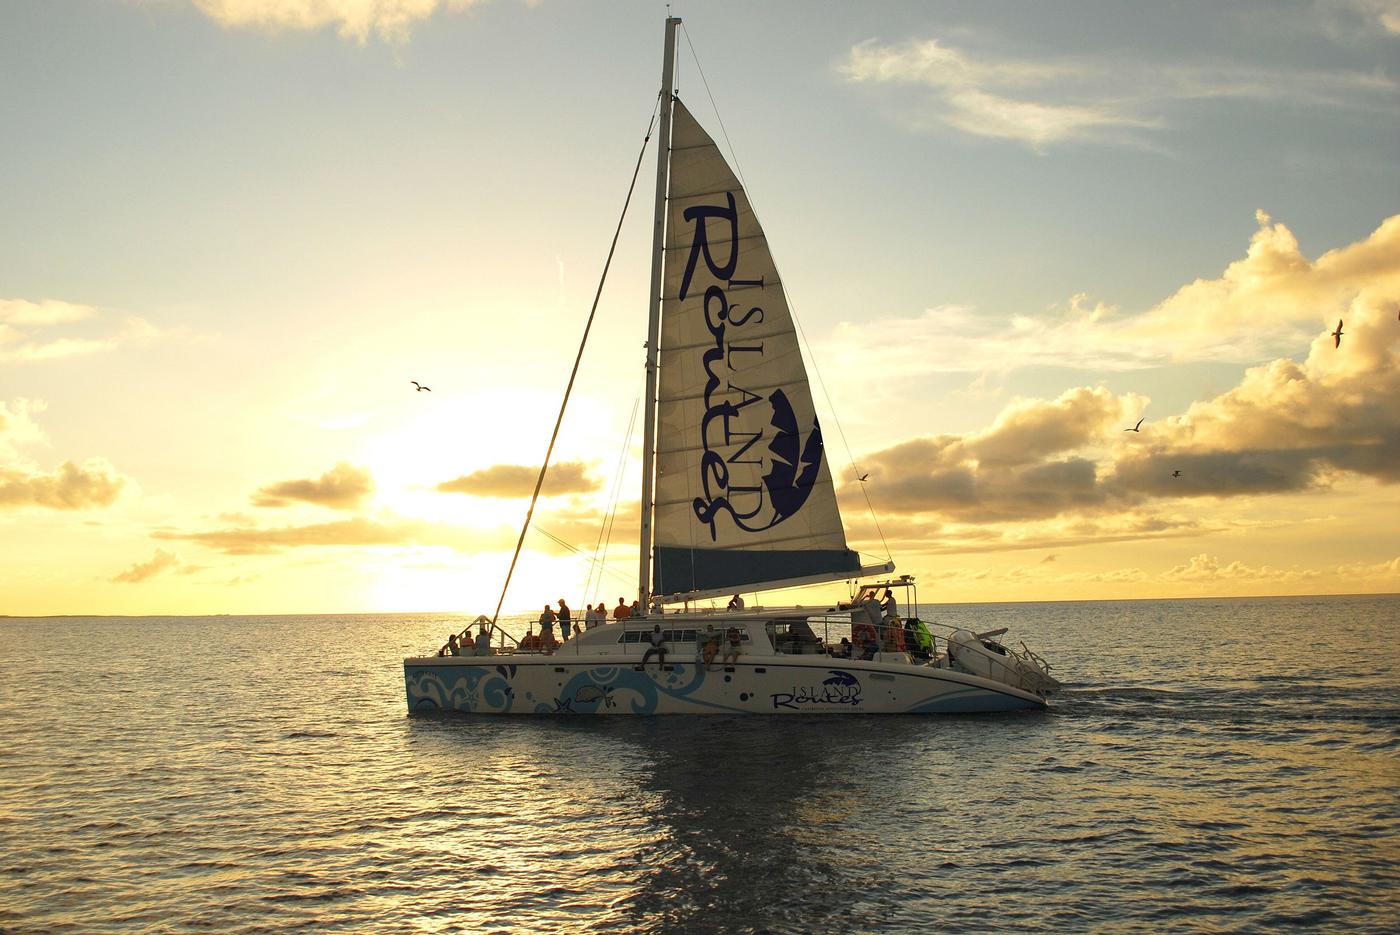 guests on board of the island routes catamaran cruise enjoying a sunset ride